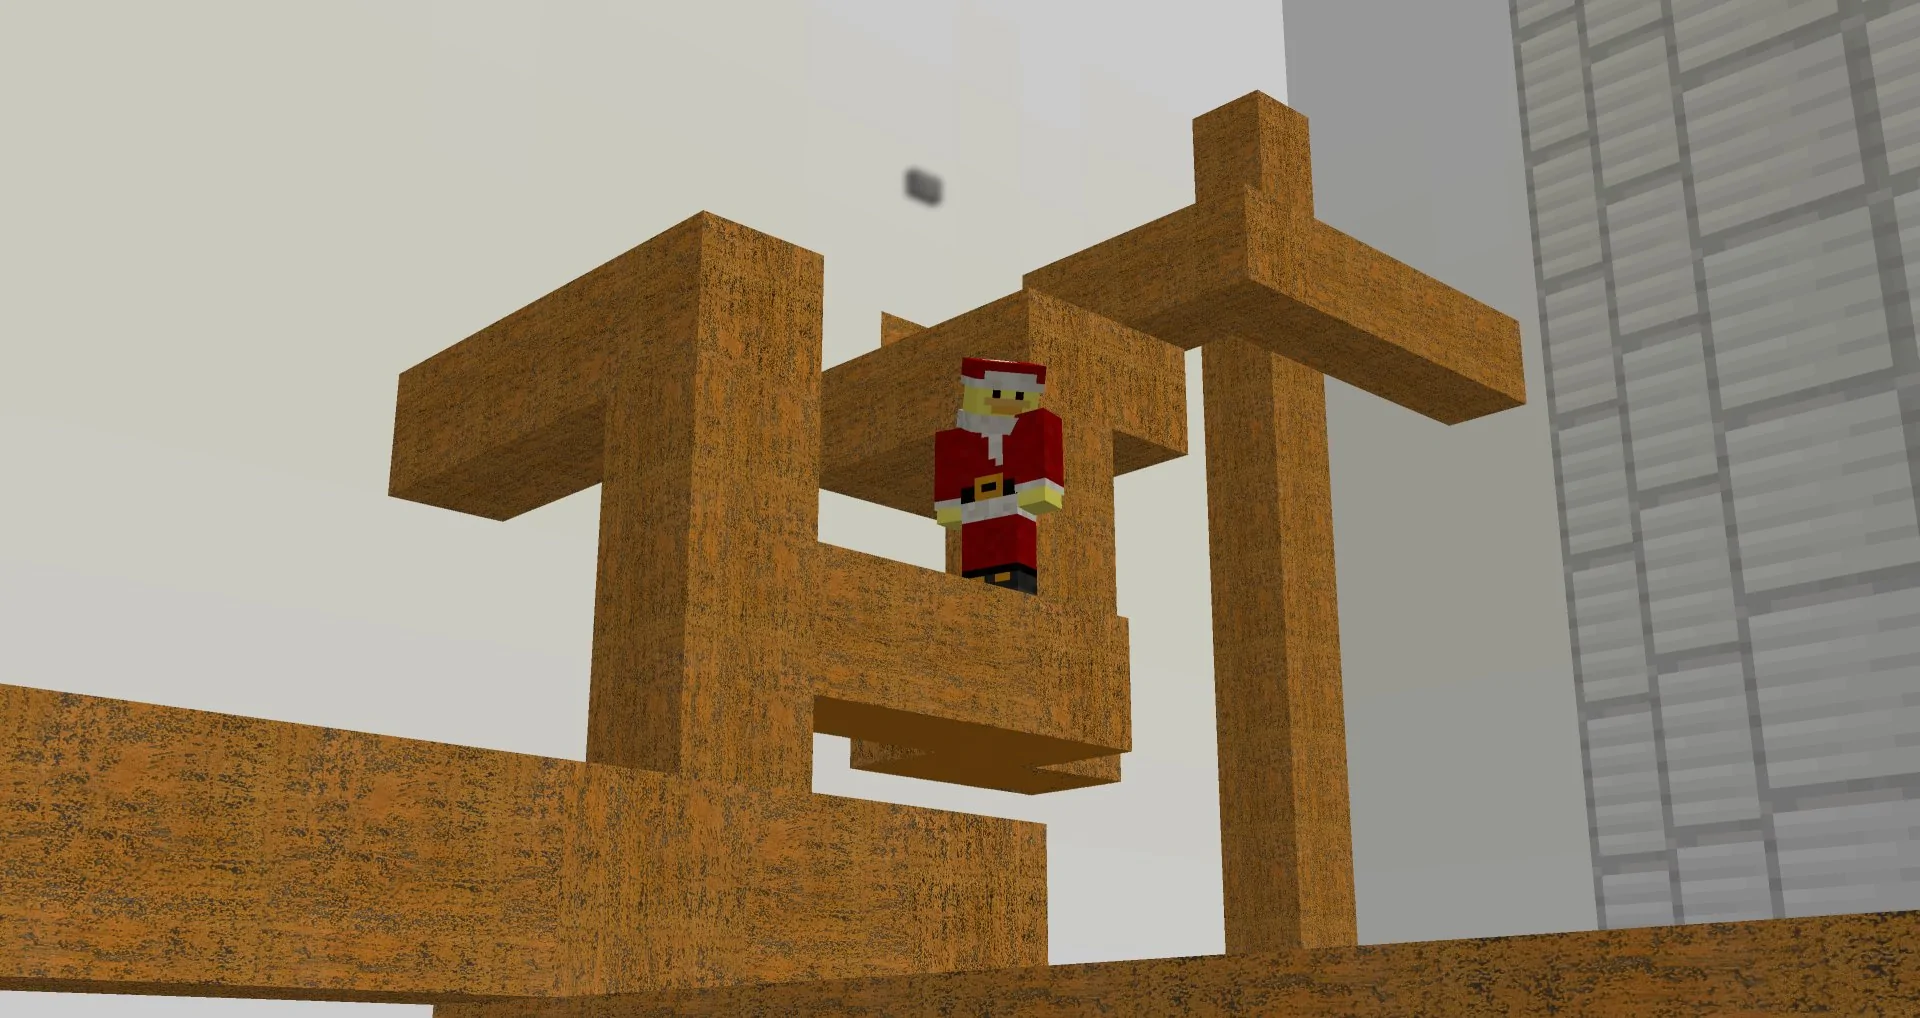 Minecraft player standing on pipes.